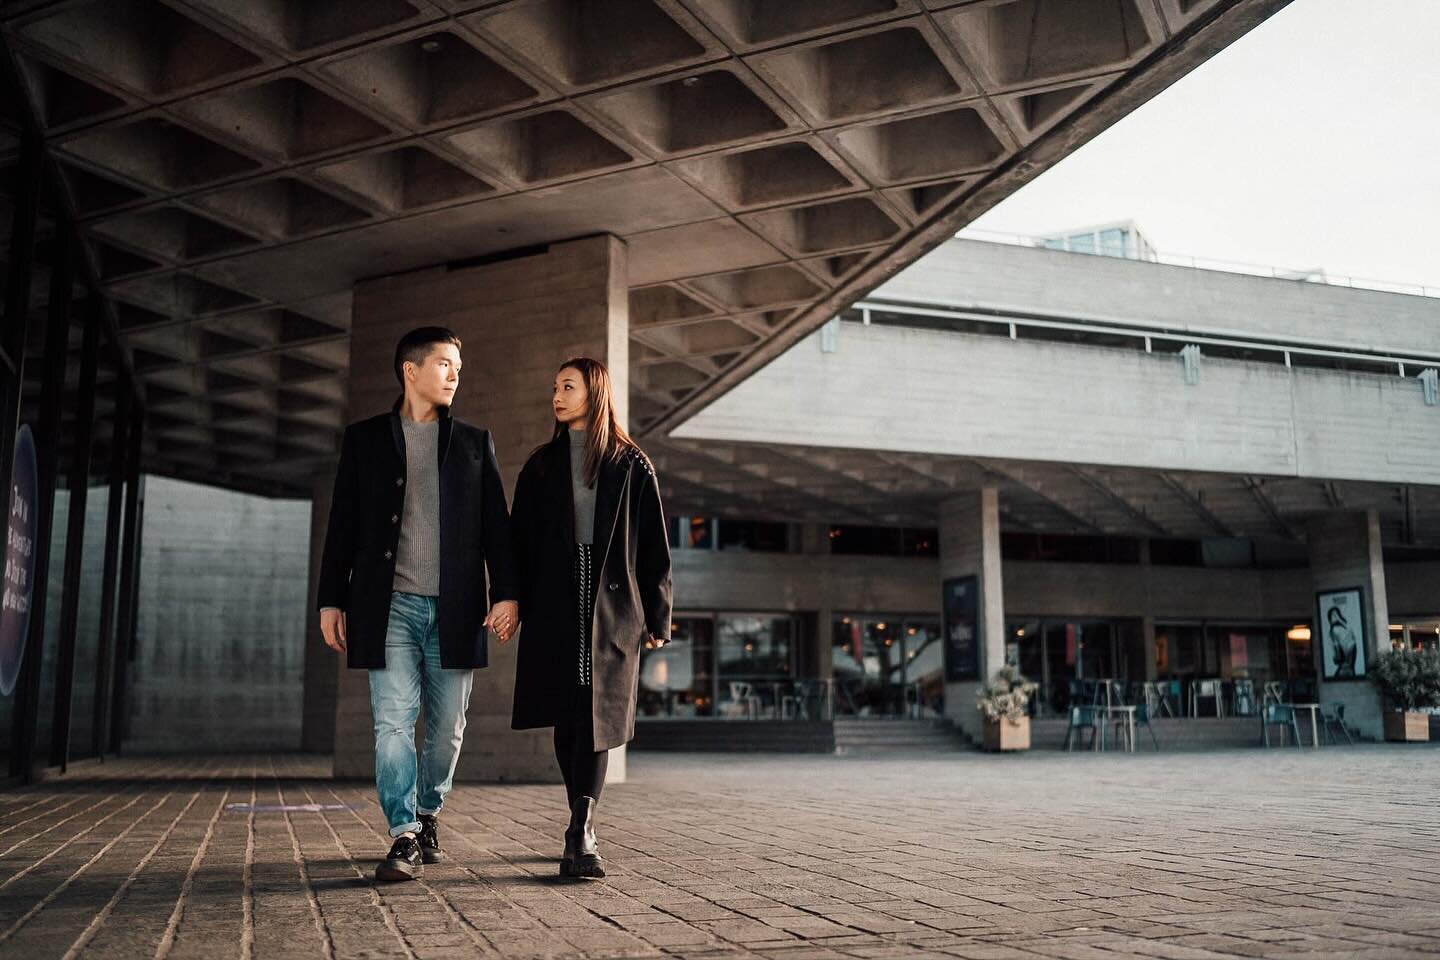 Another from Lilian + Alastair&rsquo;s couple shoot along the Southbank.
.
.
.
.
.
#londoncoupleshoot #londonengagement #londonportraitphotographer #londonweddingphotographer #southbank #nationaltheatre #londonelopement #londonelopementphotographer